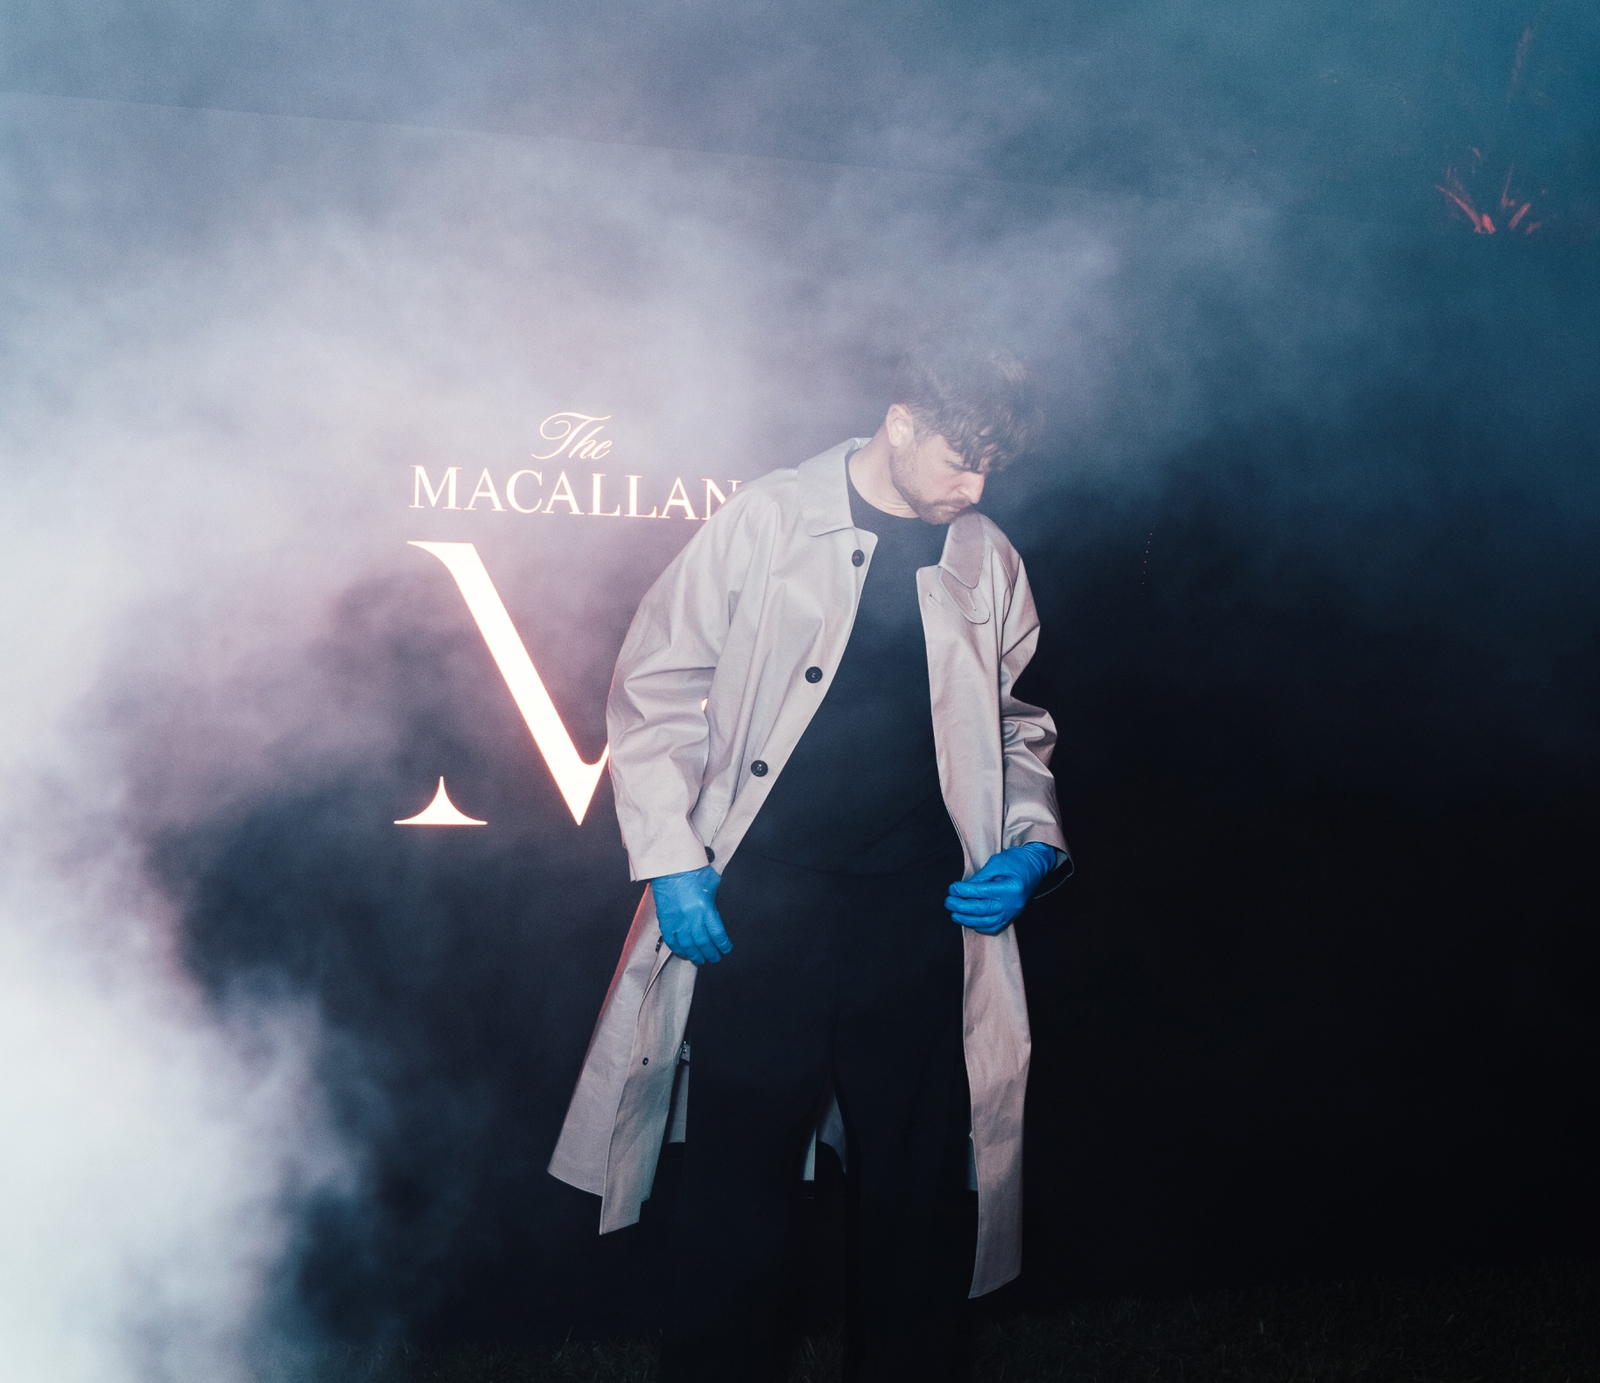 18 MONTHS OF CRAFT FOR A 200 YEAR OLD WHISKY: THE MACALLAN